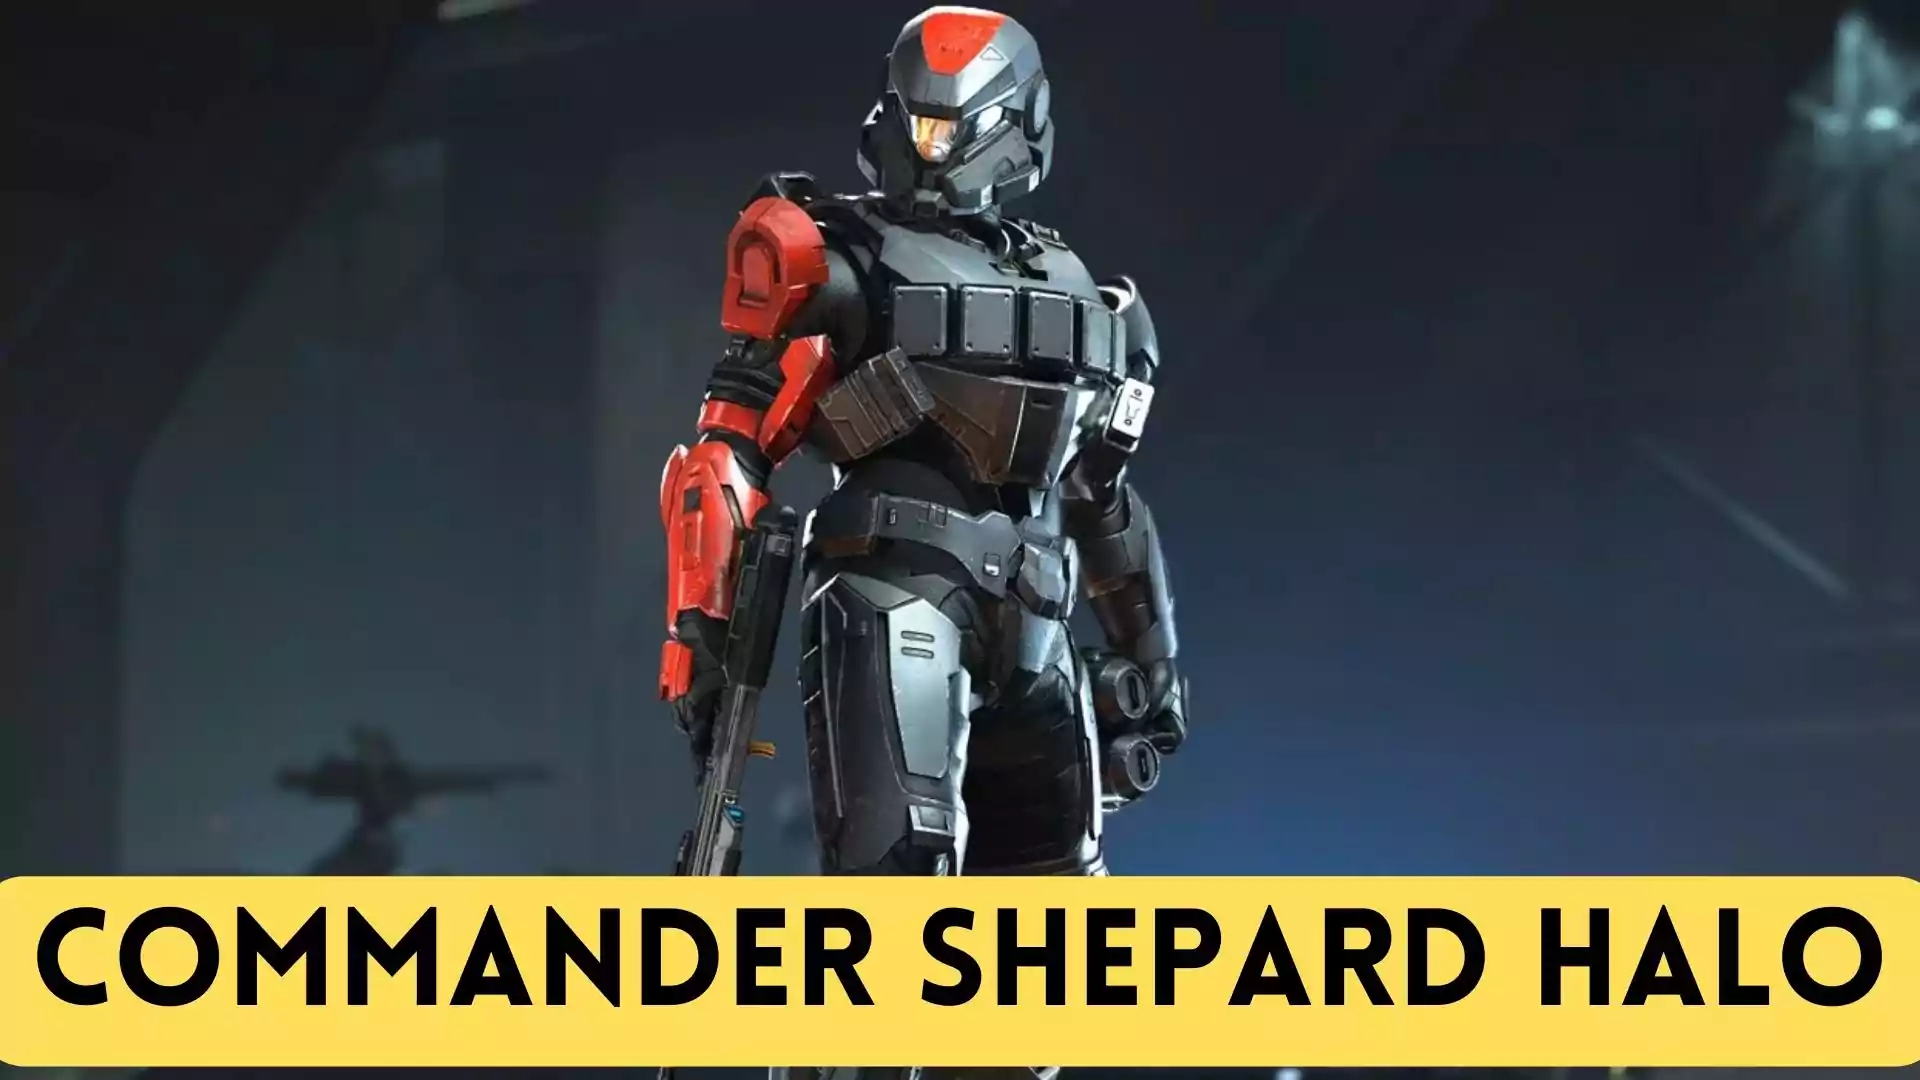 Commander Shepard Halo, Halo Tv series, Halo Video Game, Shepard from Halo, Shepard from Halo Origin, Shepard Halo Age and Height.